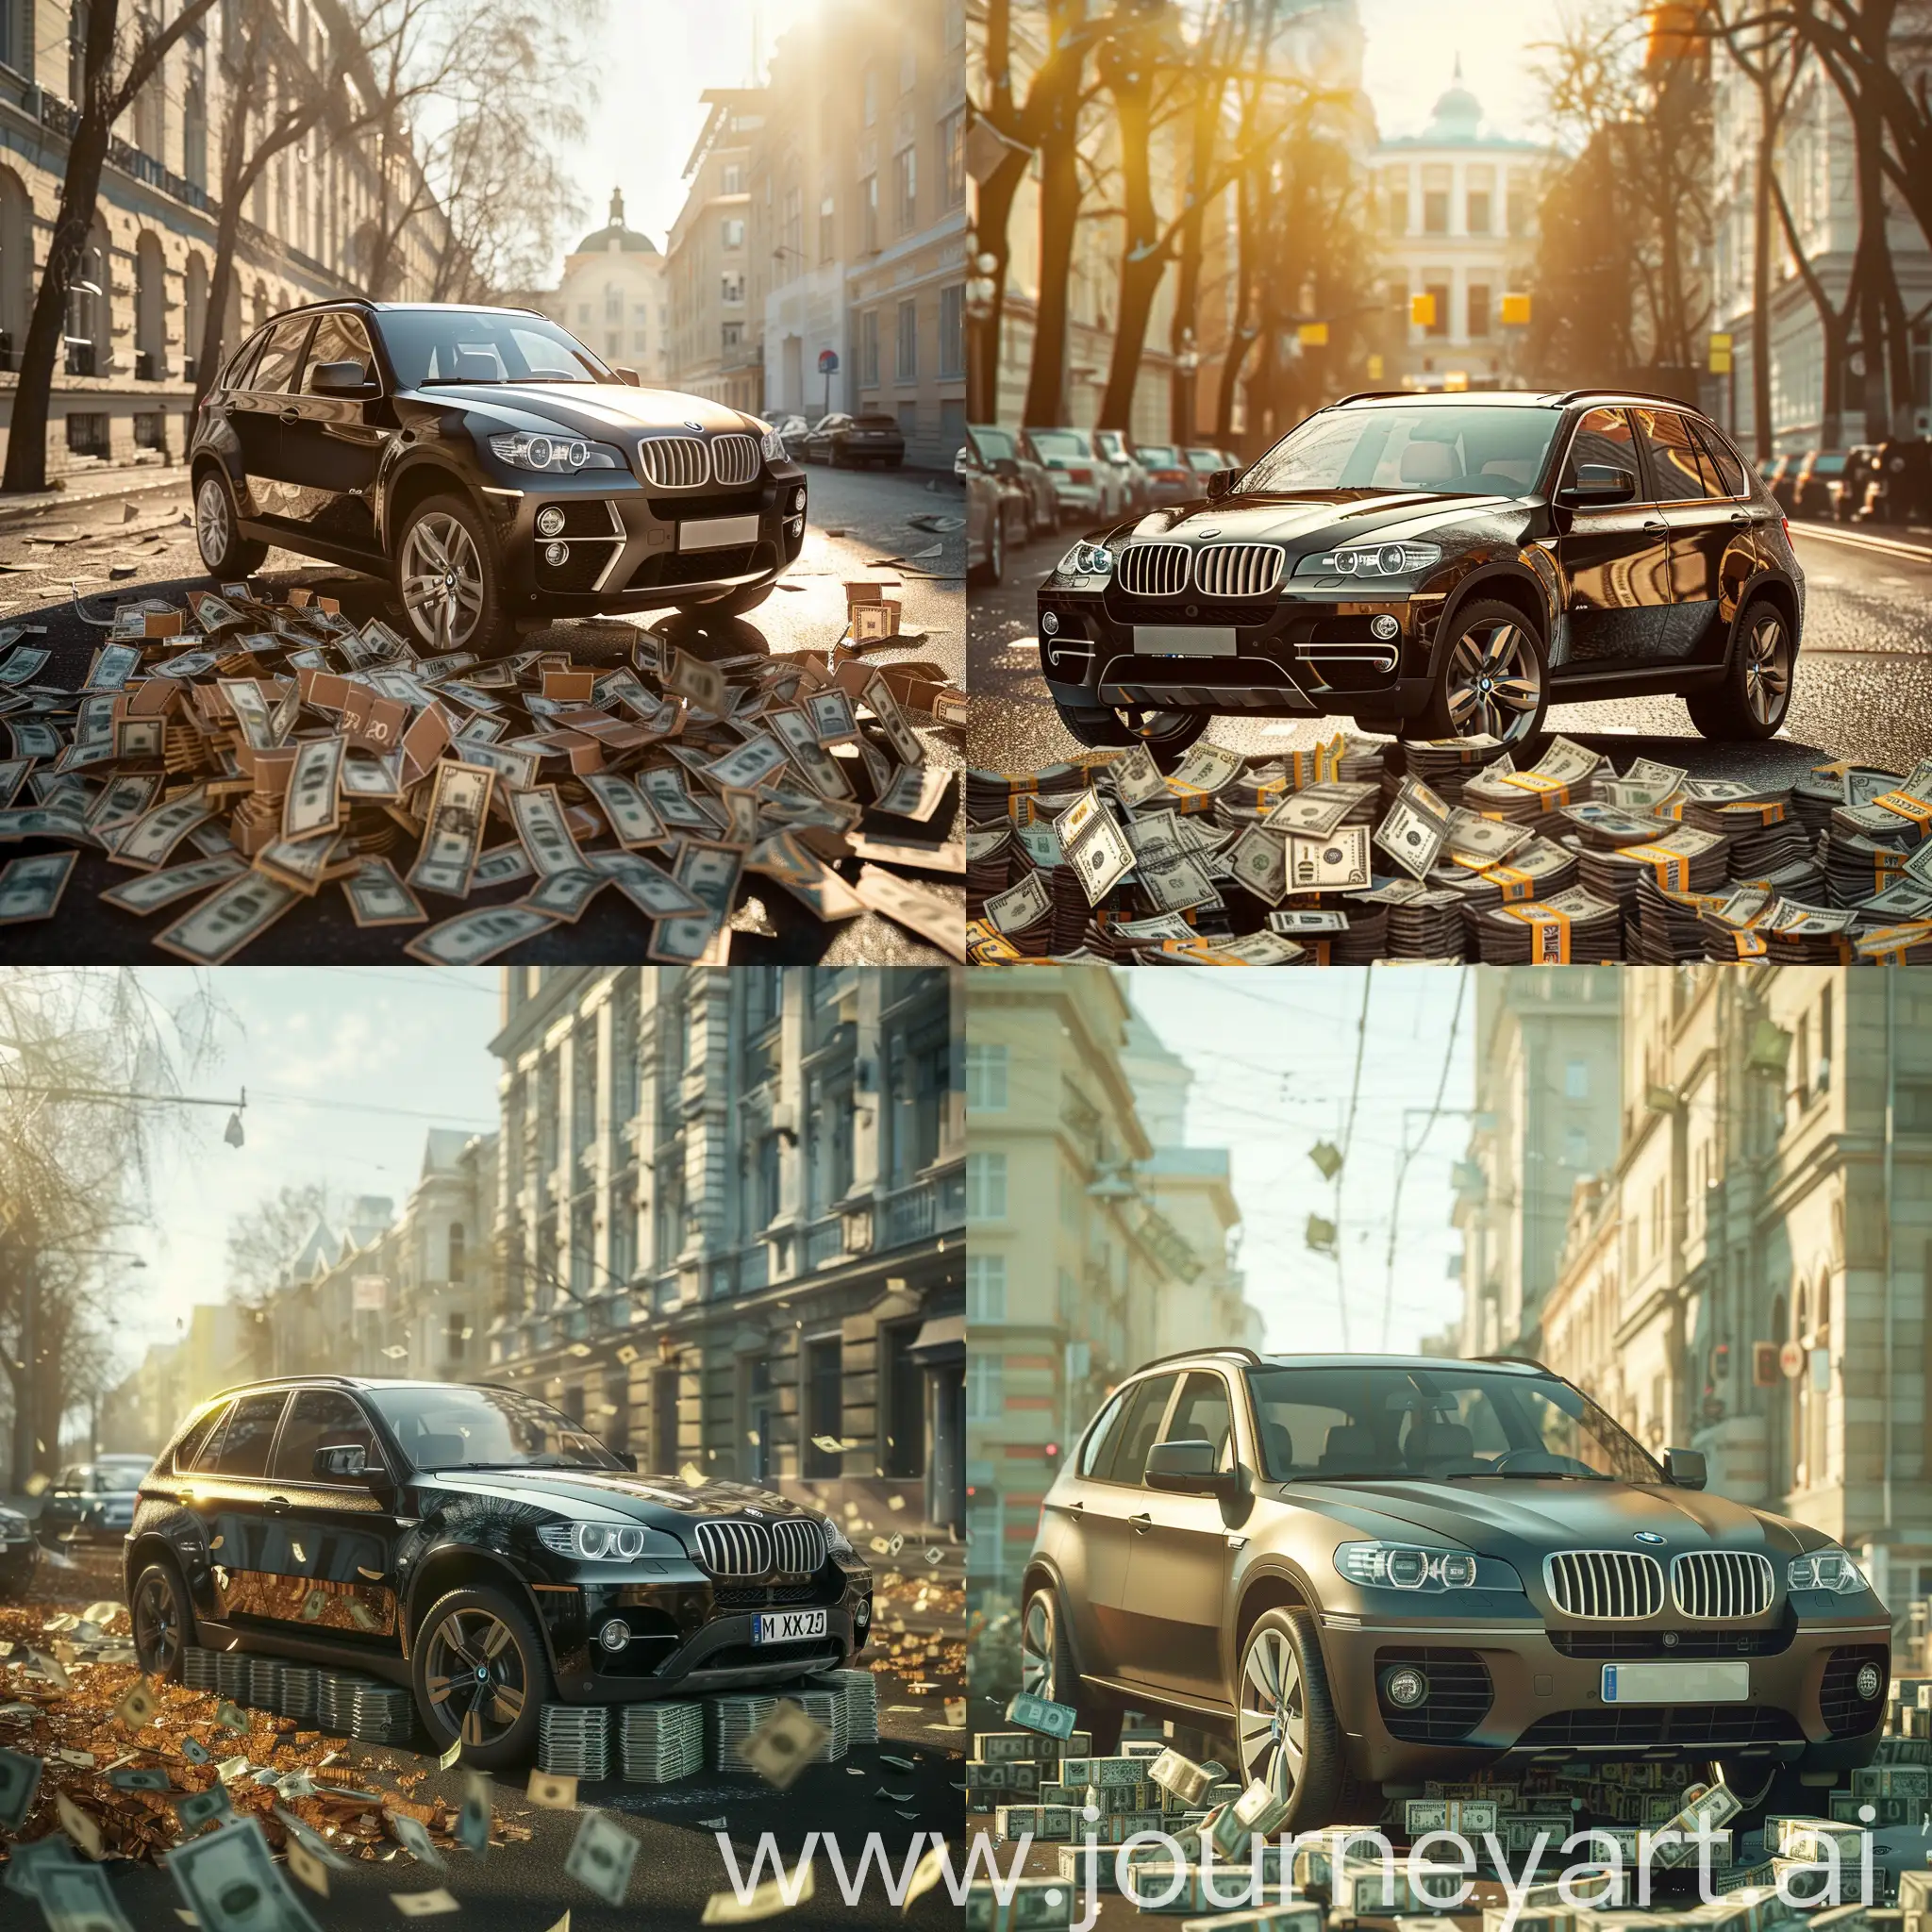 Luxury-BMW-X5-Surrounded-by-Money-in-Sunny-Russian-Street-Scene